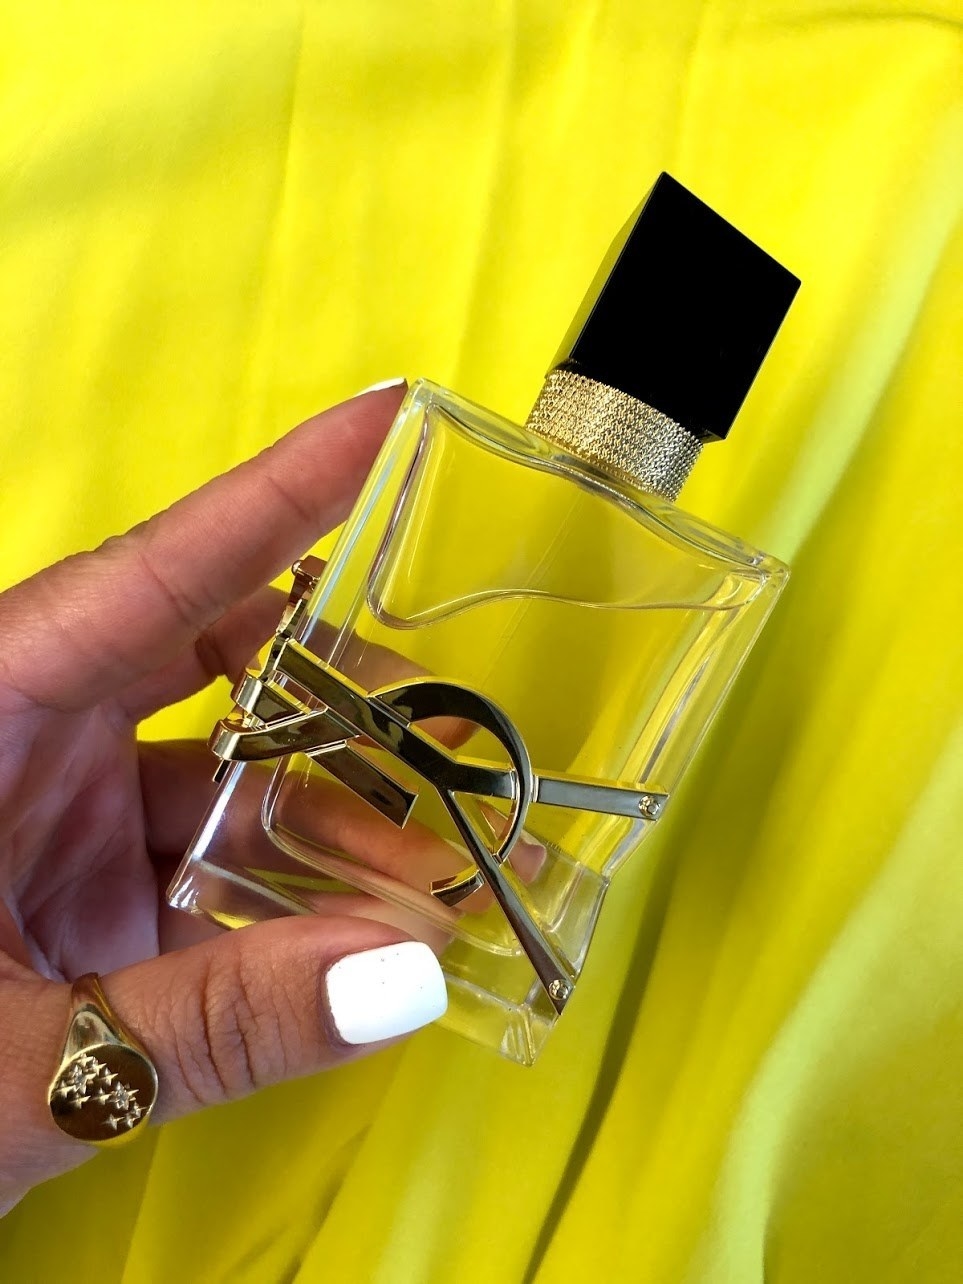 clear bottle with gold YSL logo and black cap